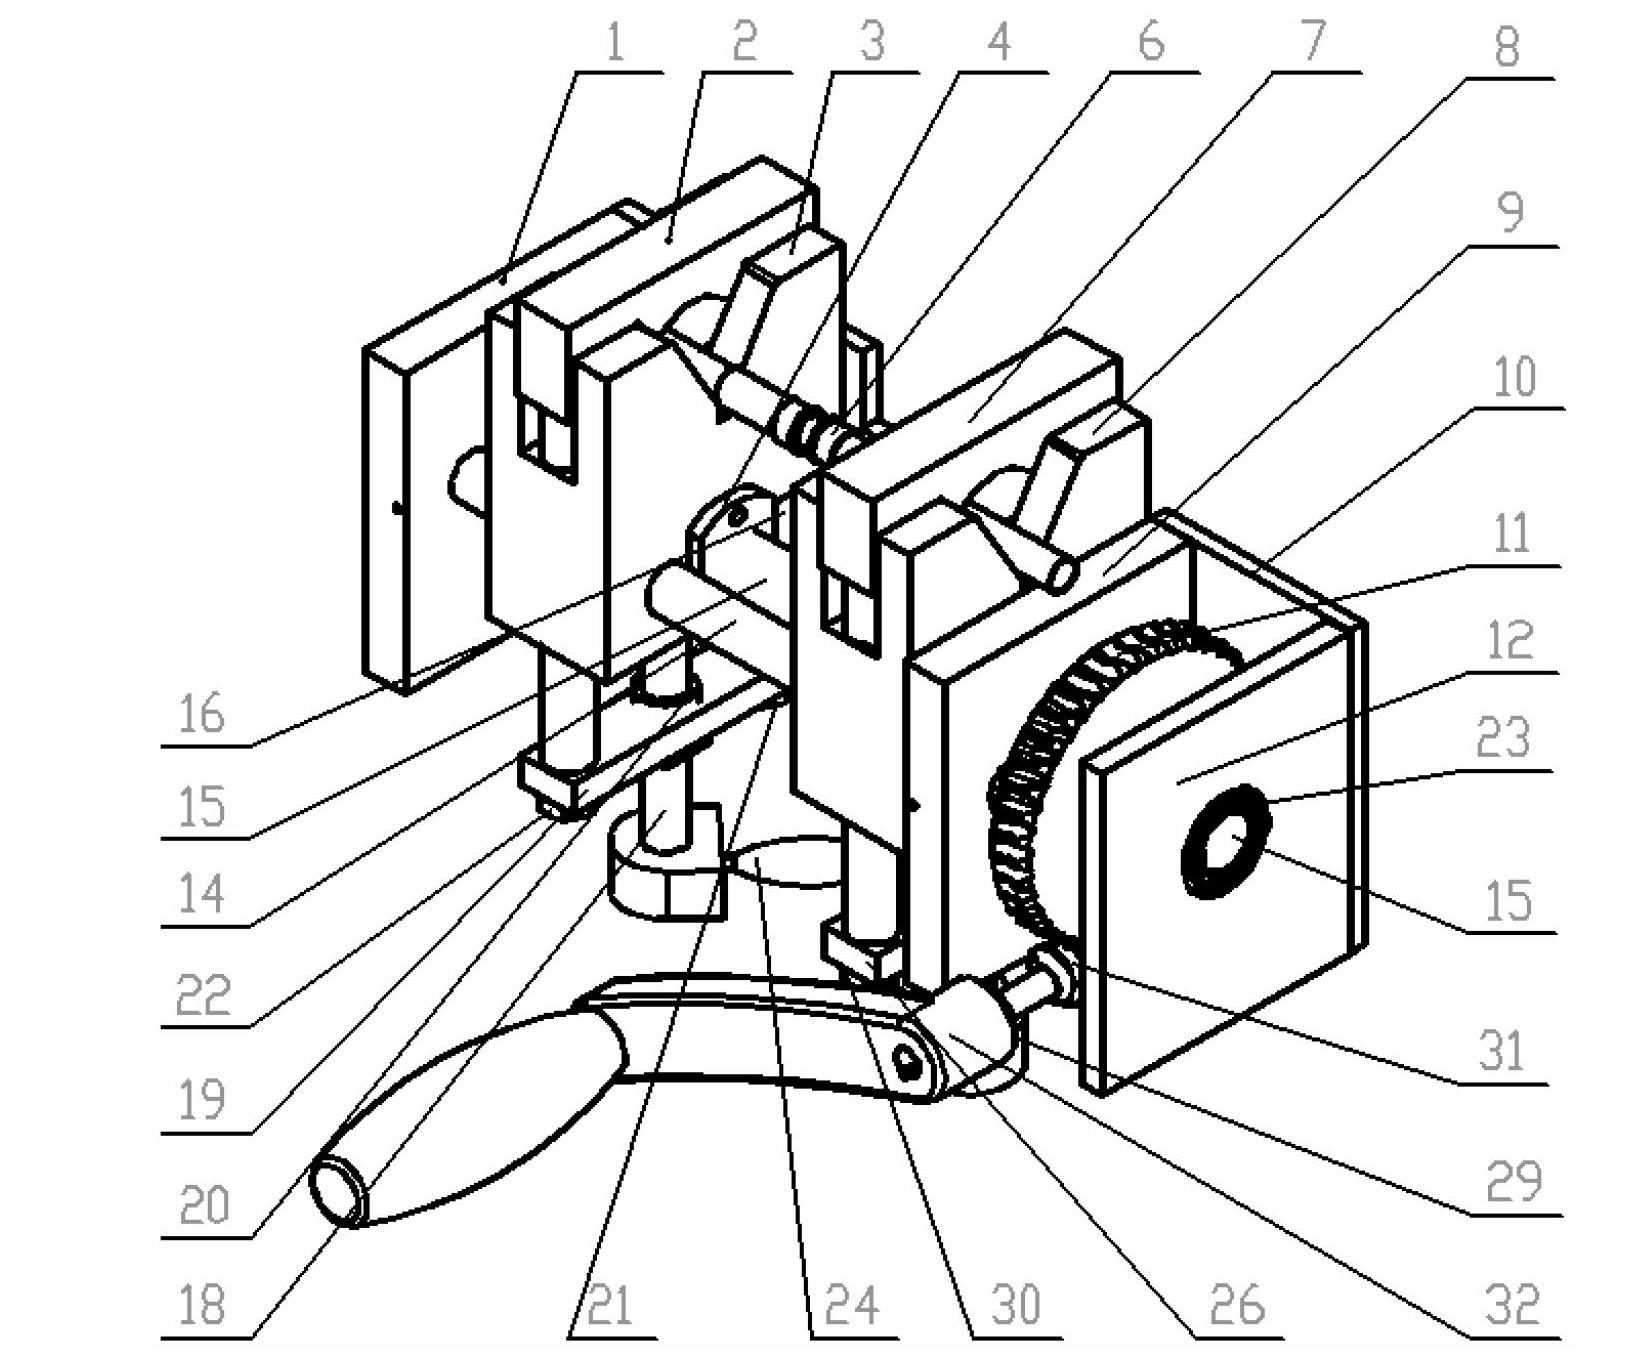 Device for welding slim tubes with six degree of freedom constrained after being centered and butted